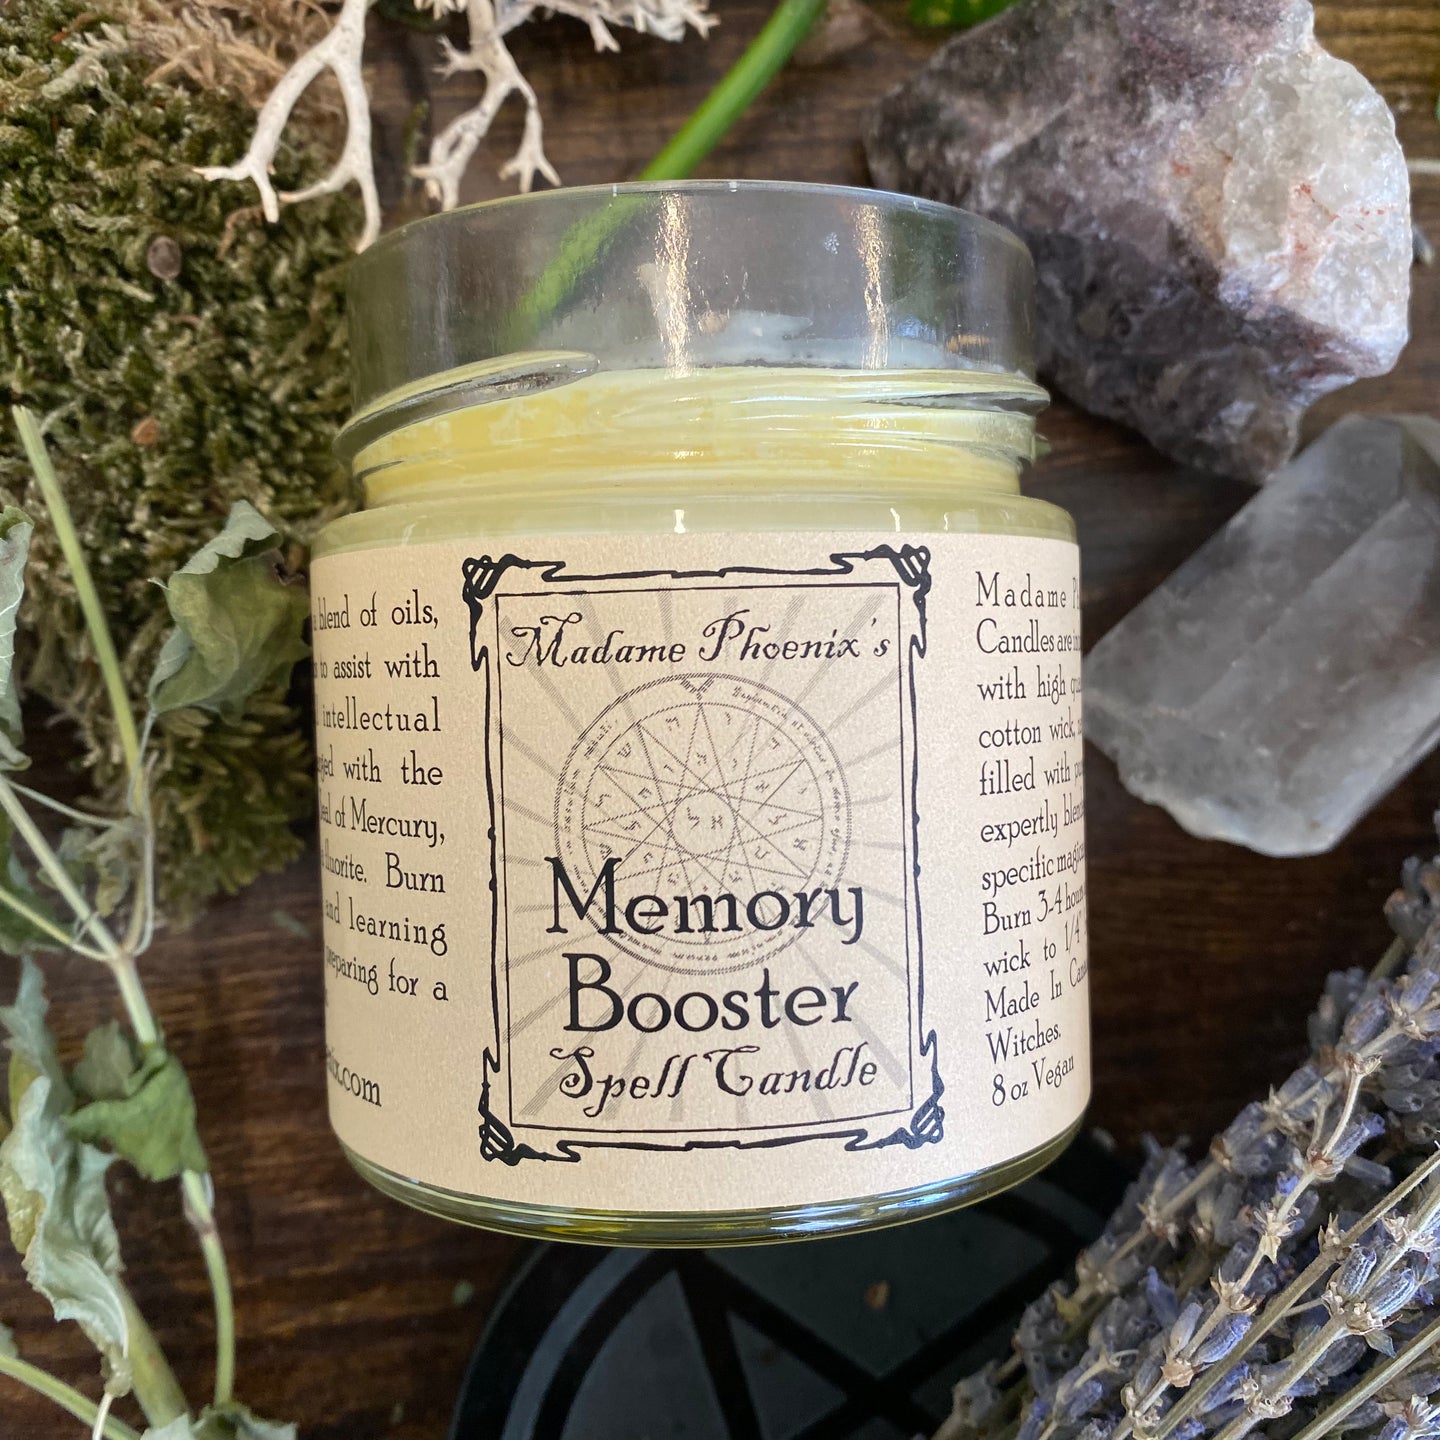 Memory Booster Student & Learning Spell Candle